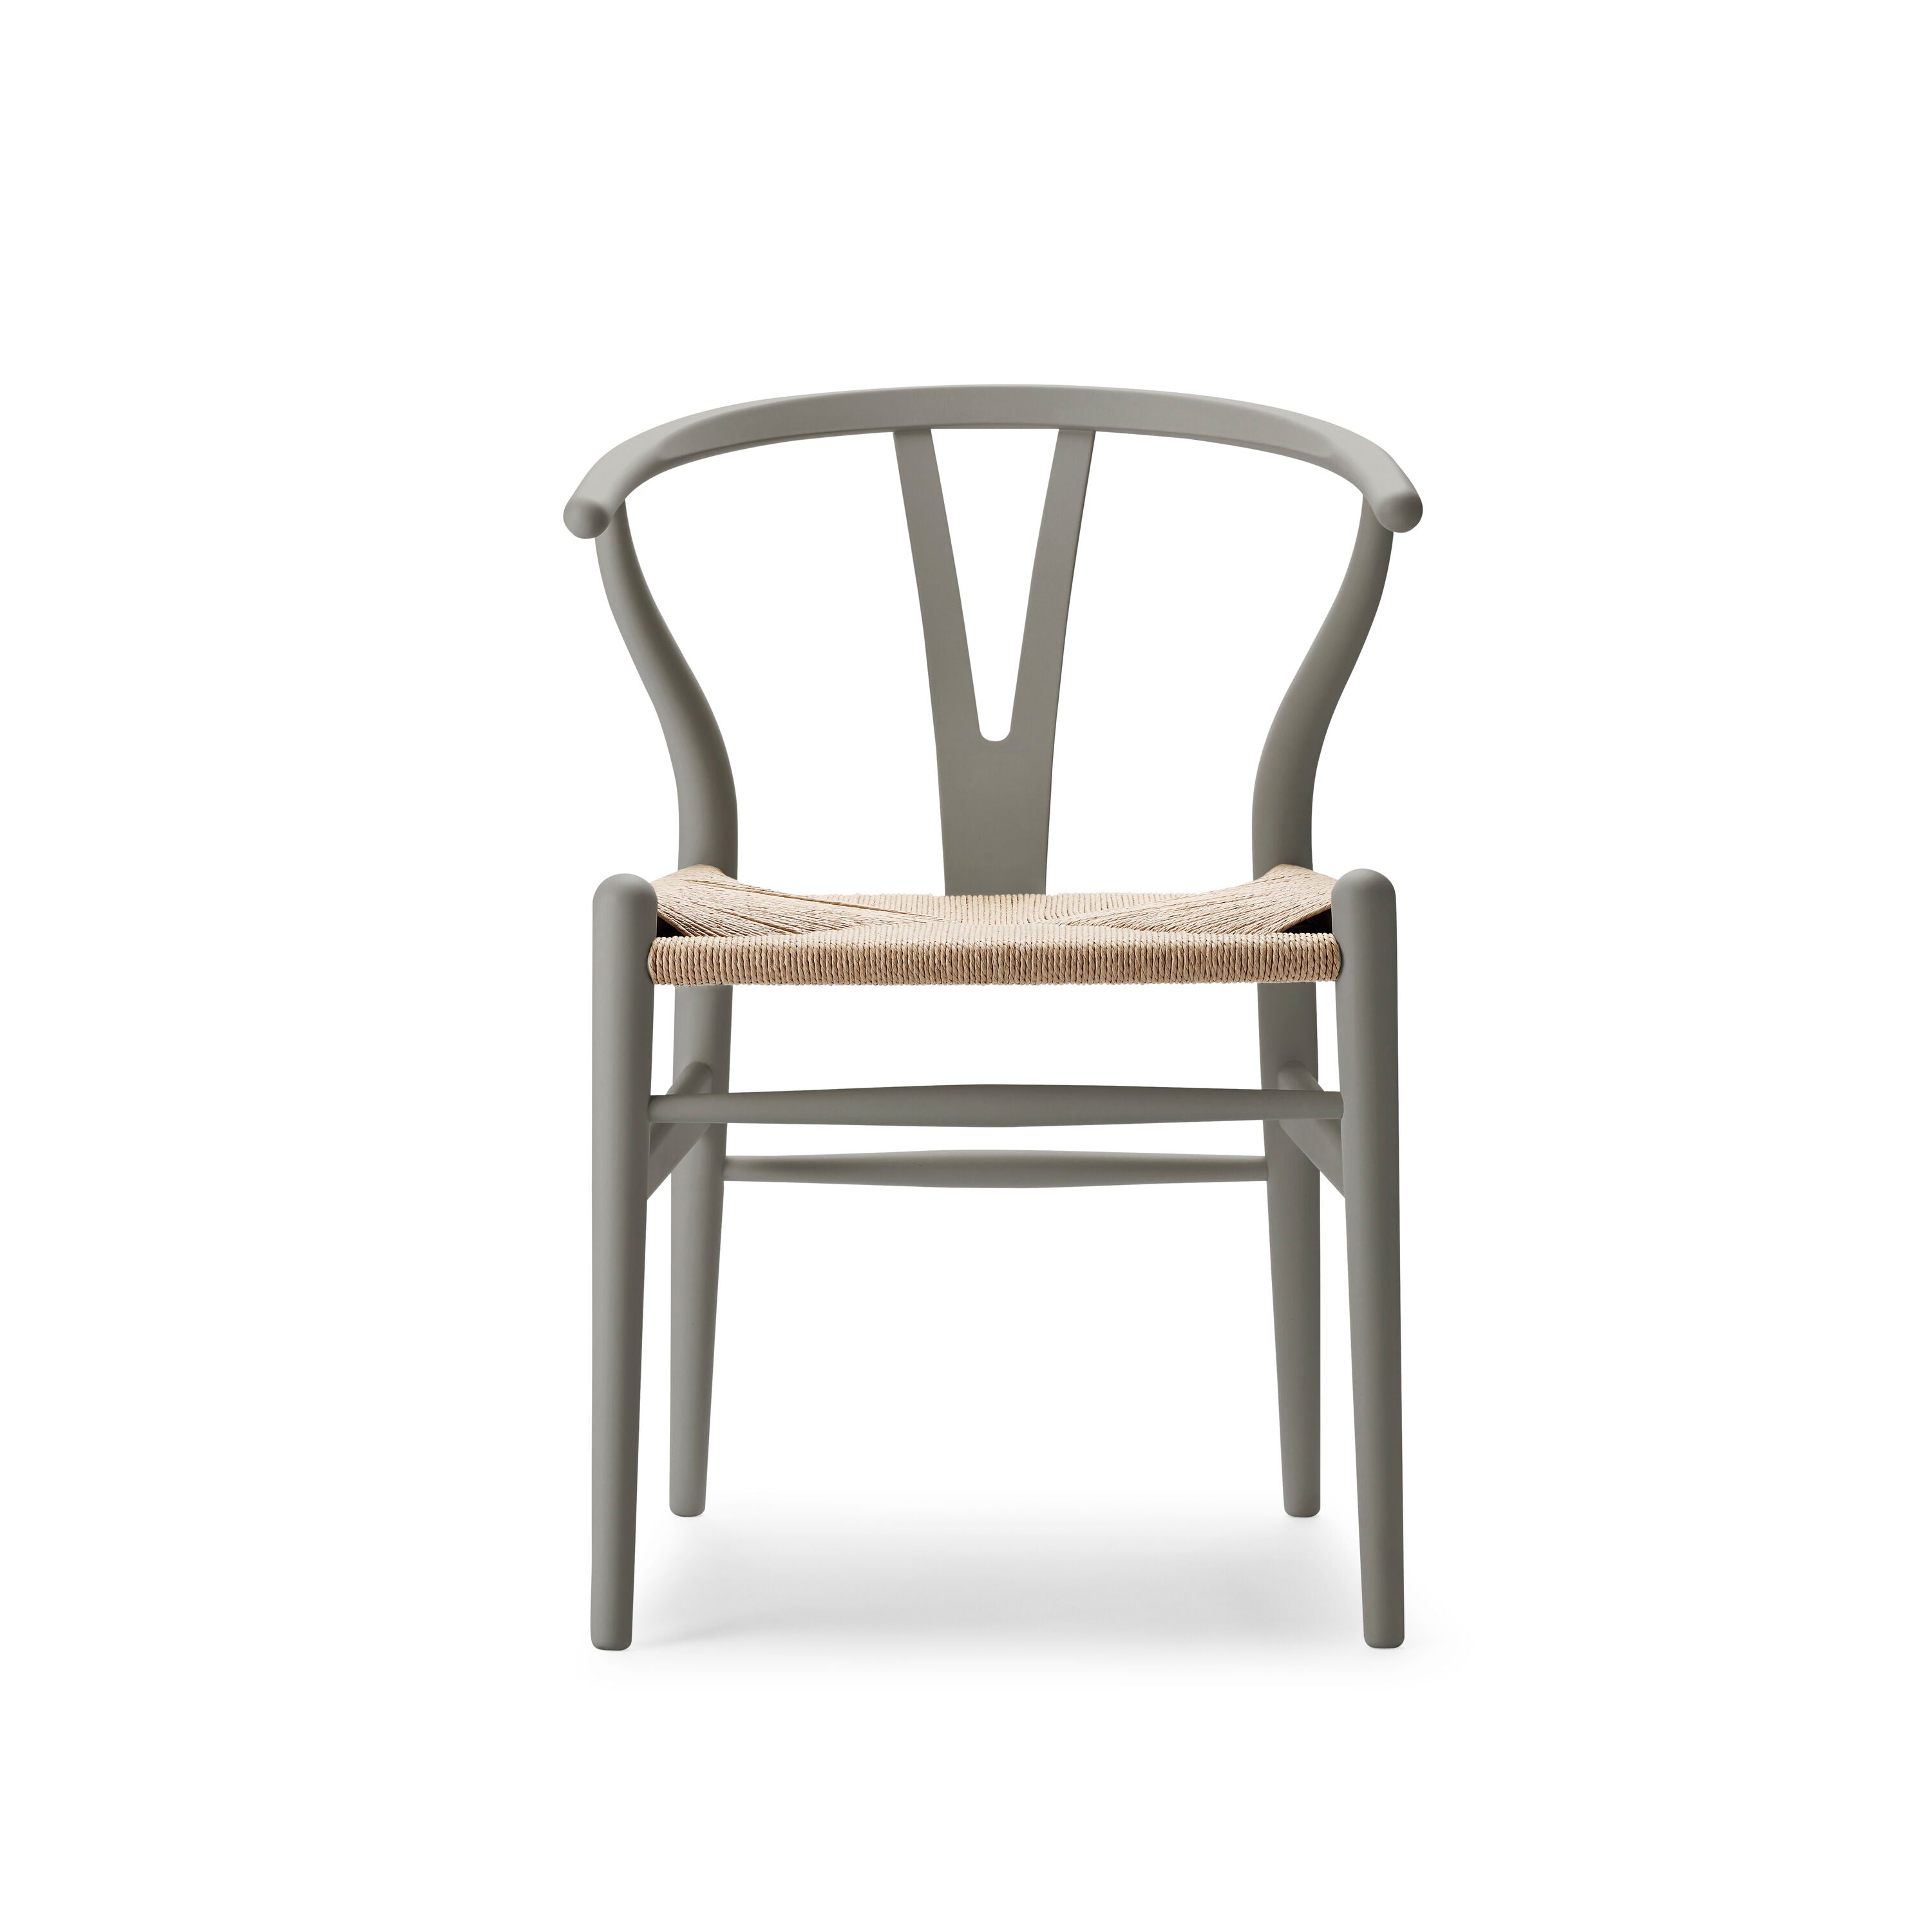 CH24 Wishbone Chair (Ilse Crawford Colors)